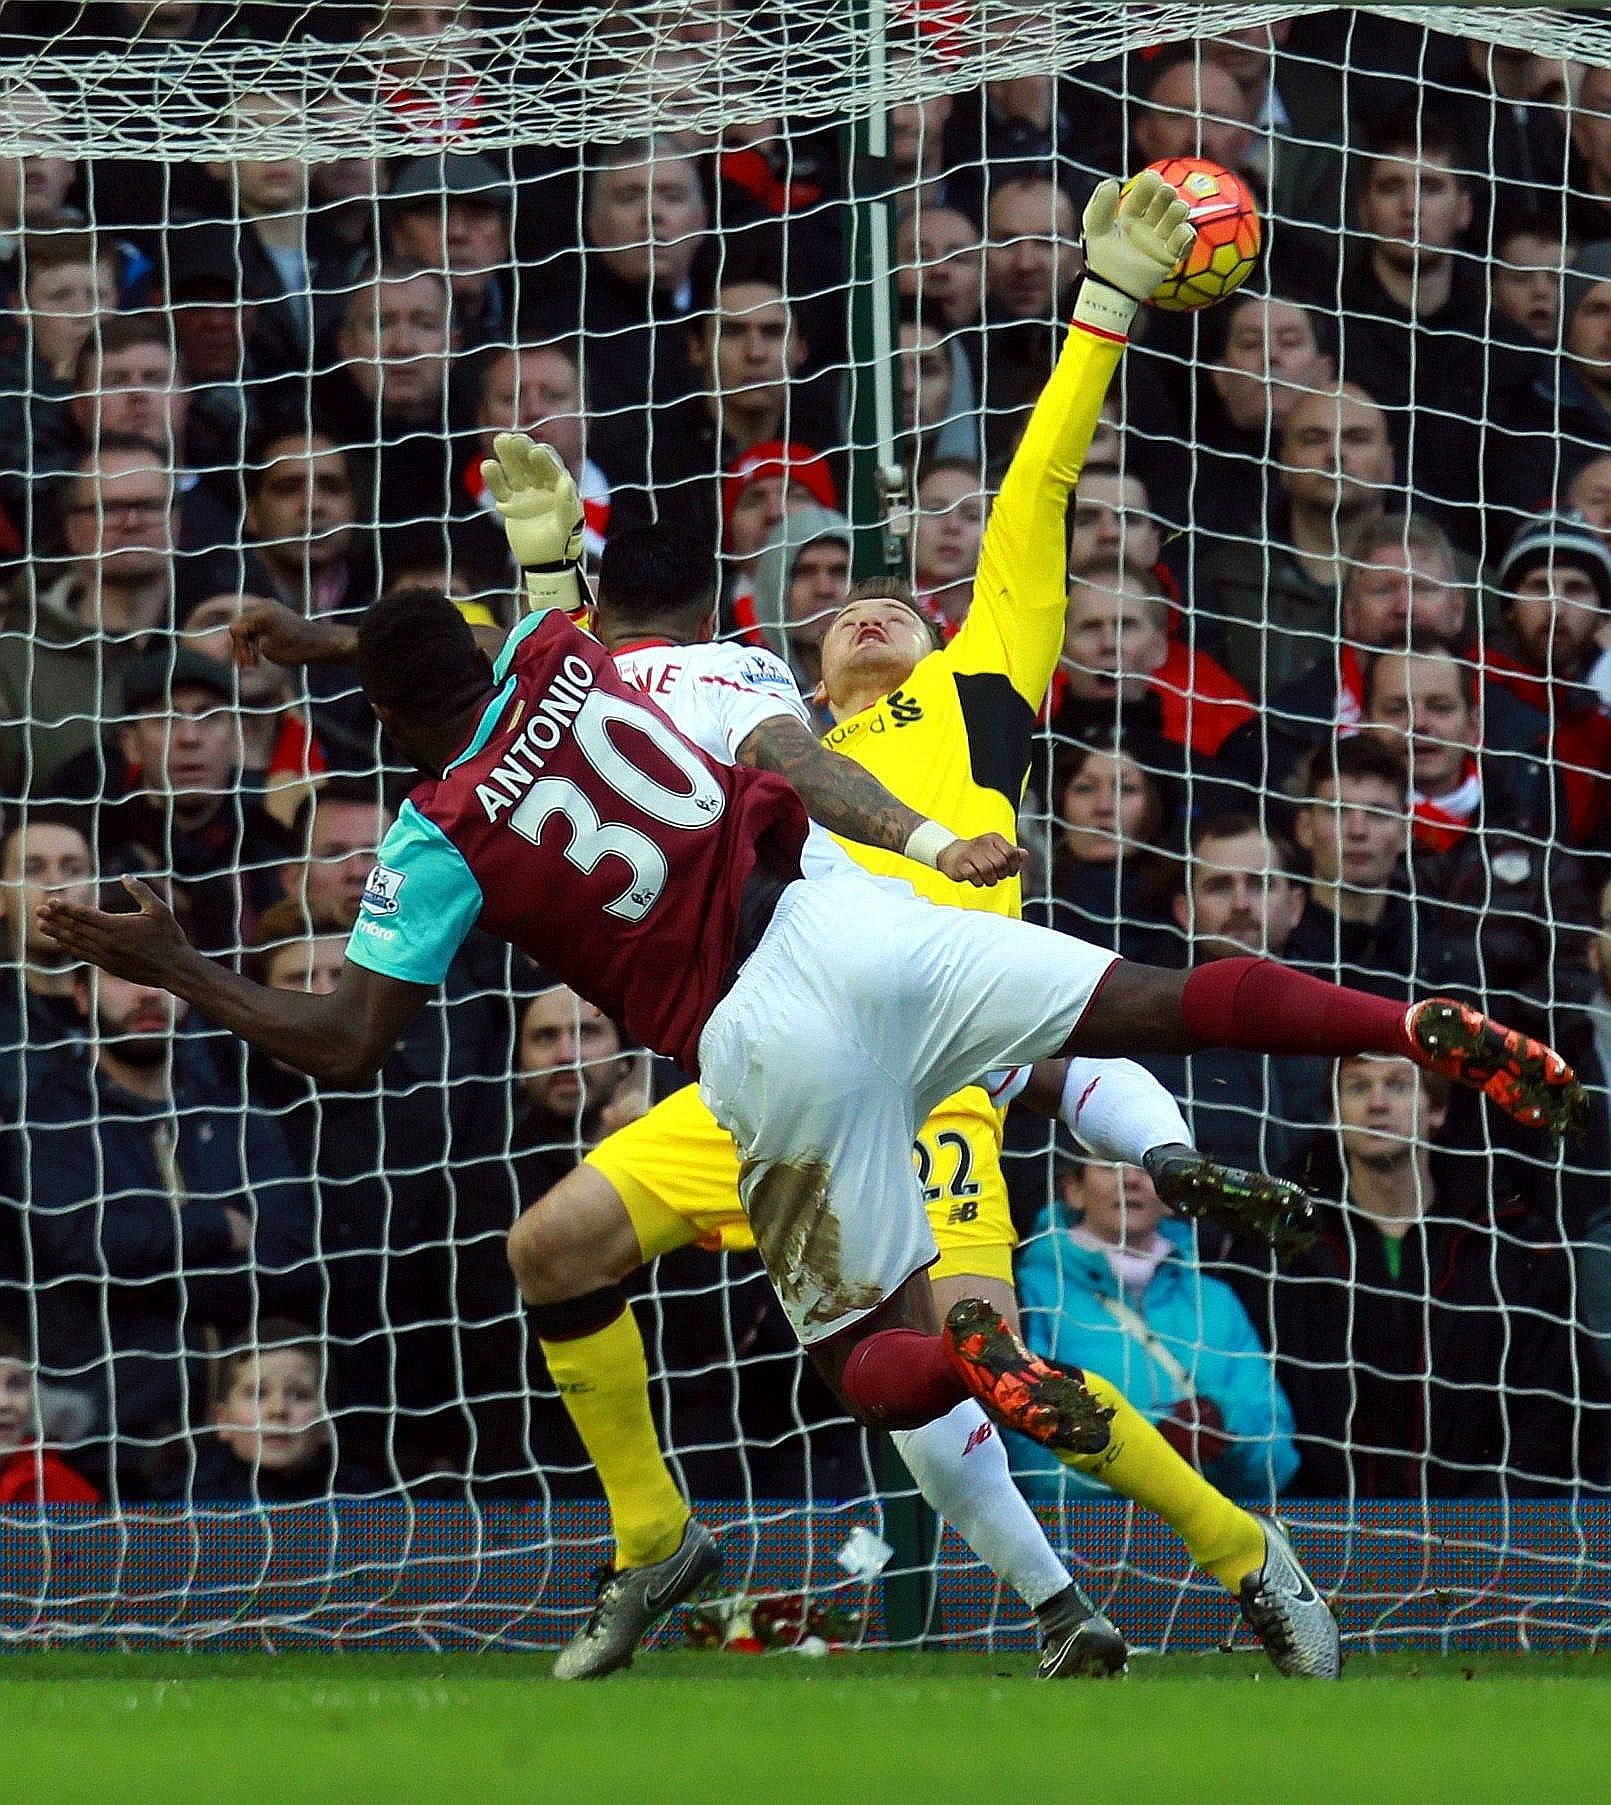 West Ham's Michail Antonio heading past Liverpool goalkeeper Simon Mignolet to open the scoring for the Hammers. Andy Carroll netted a second for the hosts to complete a league double over the Reds.